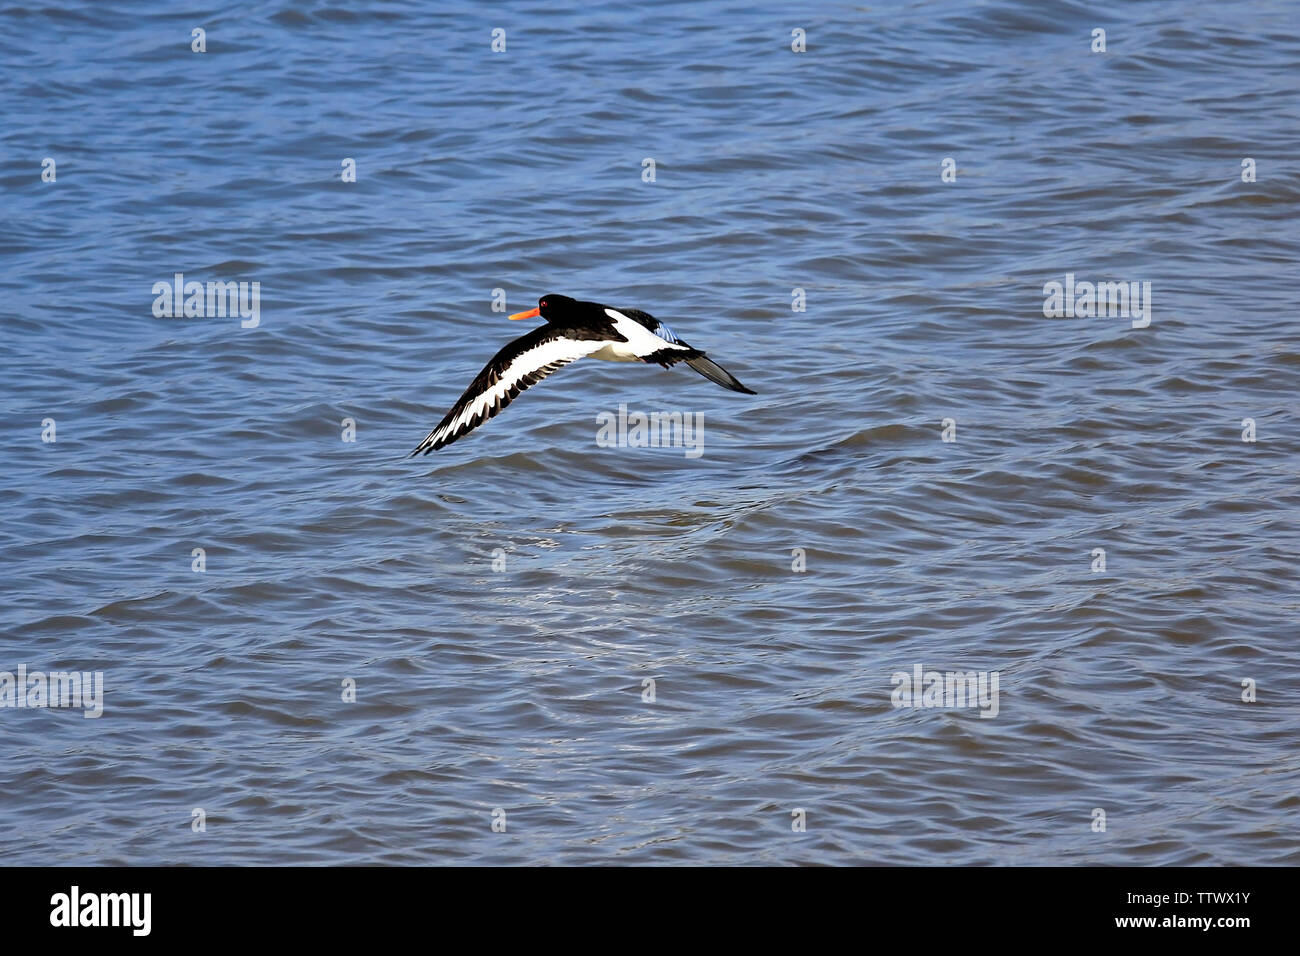 Haematopus ostralegus, Eurasian oystercatcher, flying over blue sea. Beak and eye color reveal the age of the bird, old adult in this case. Stock Photo